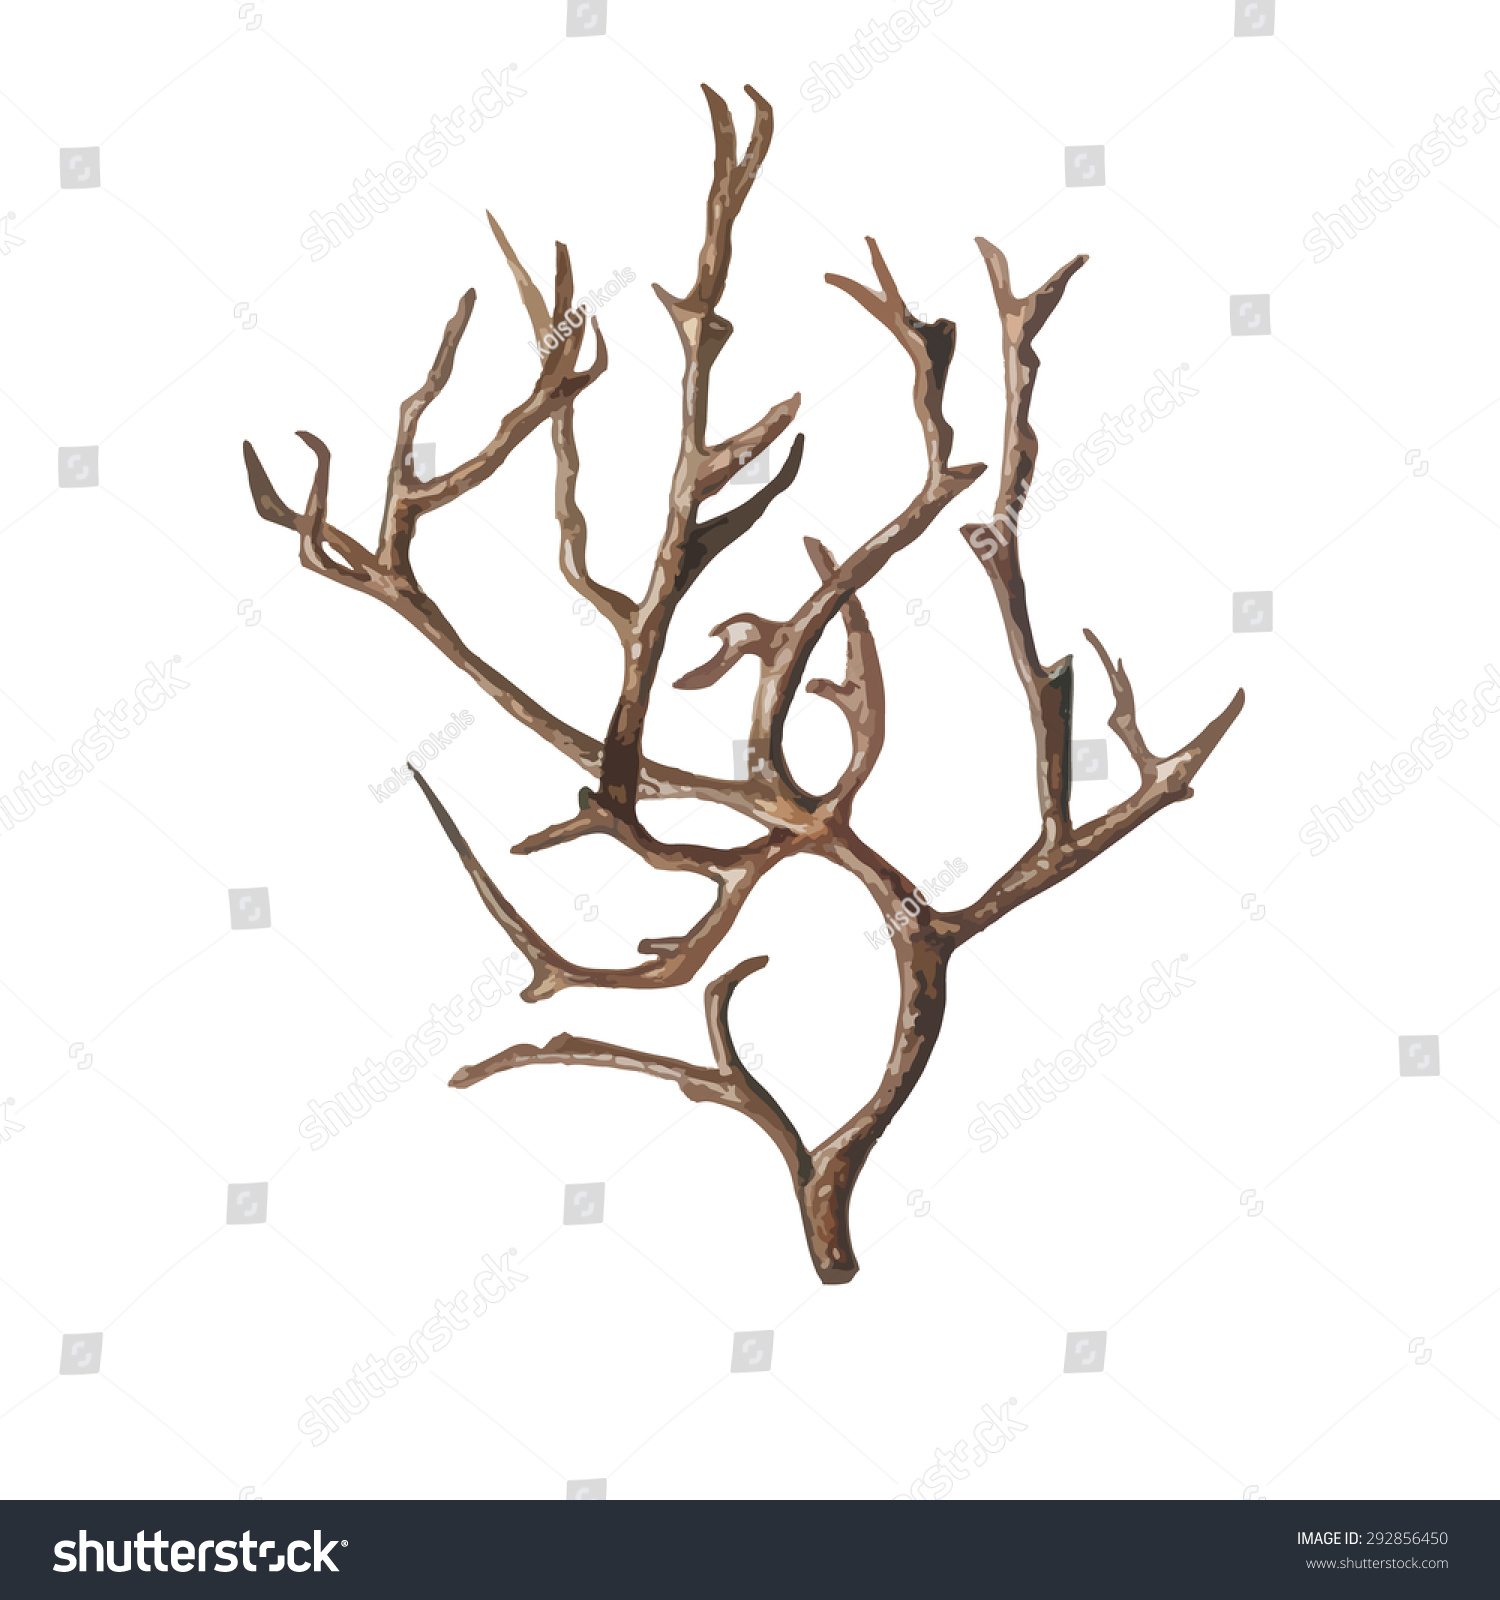 Watercolor Old Tree Without Leaves Isolated Stock Photo (Photo ...